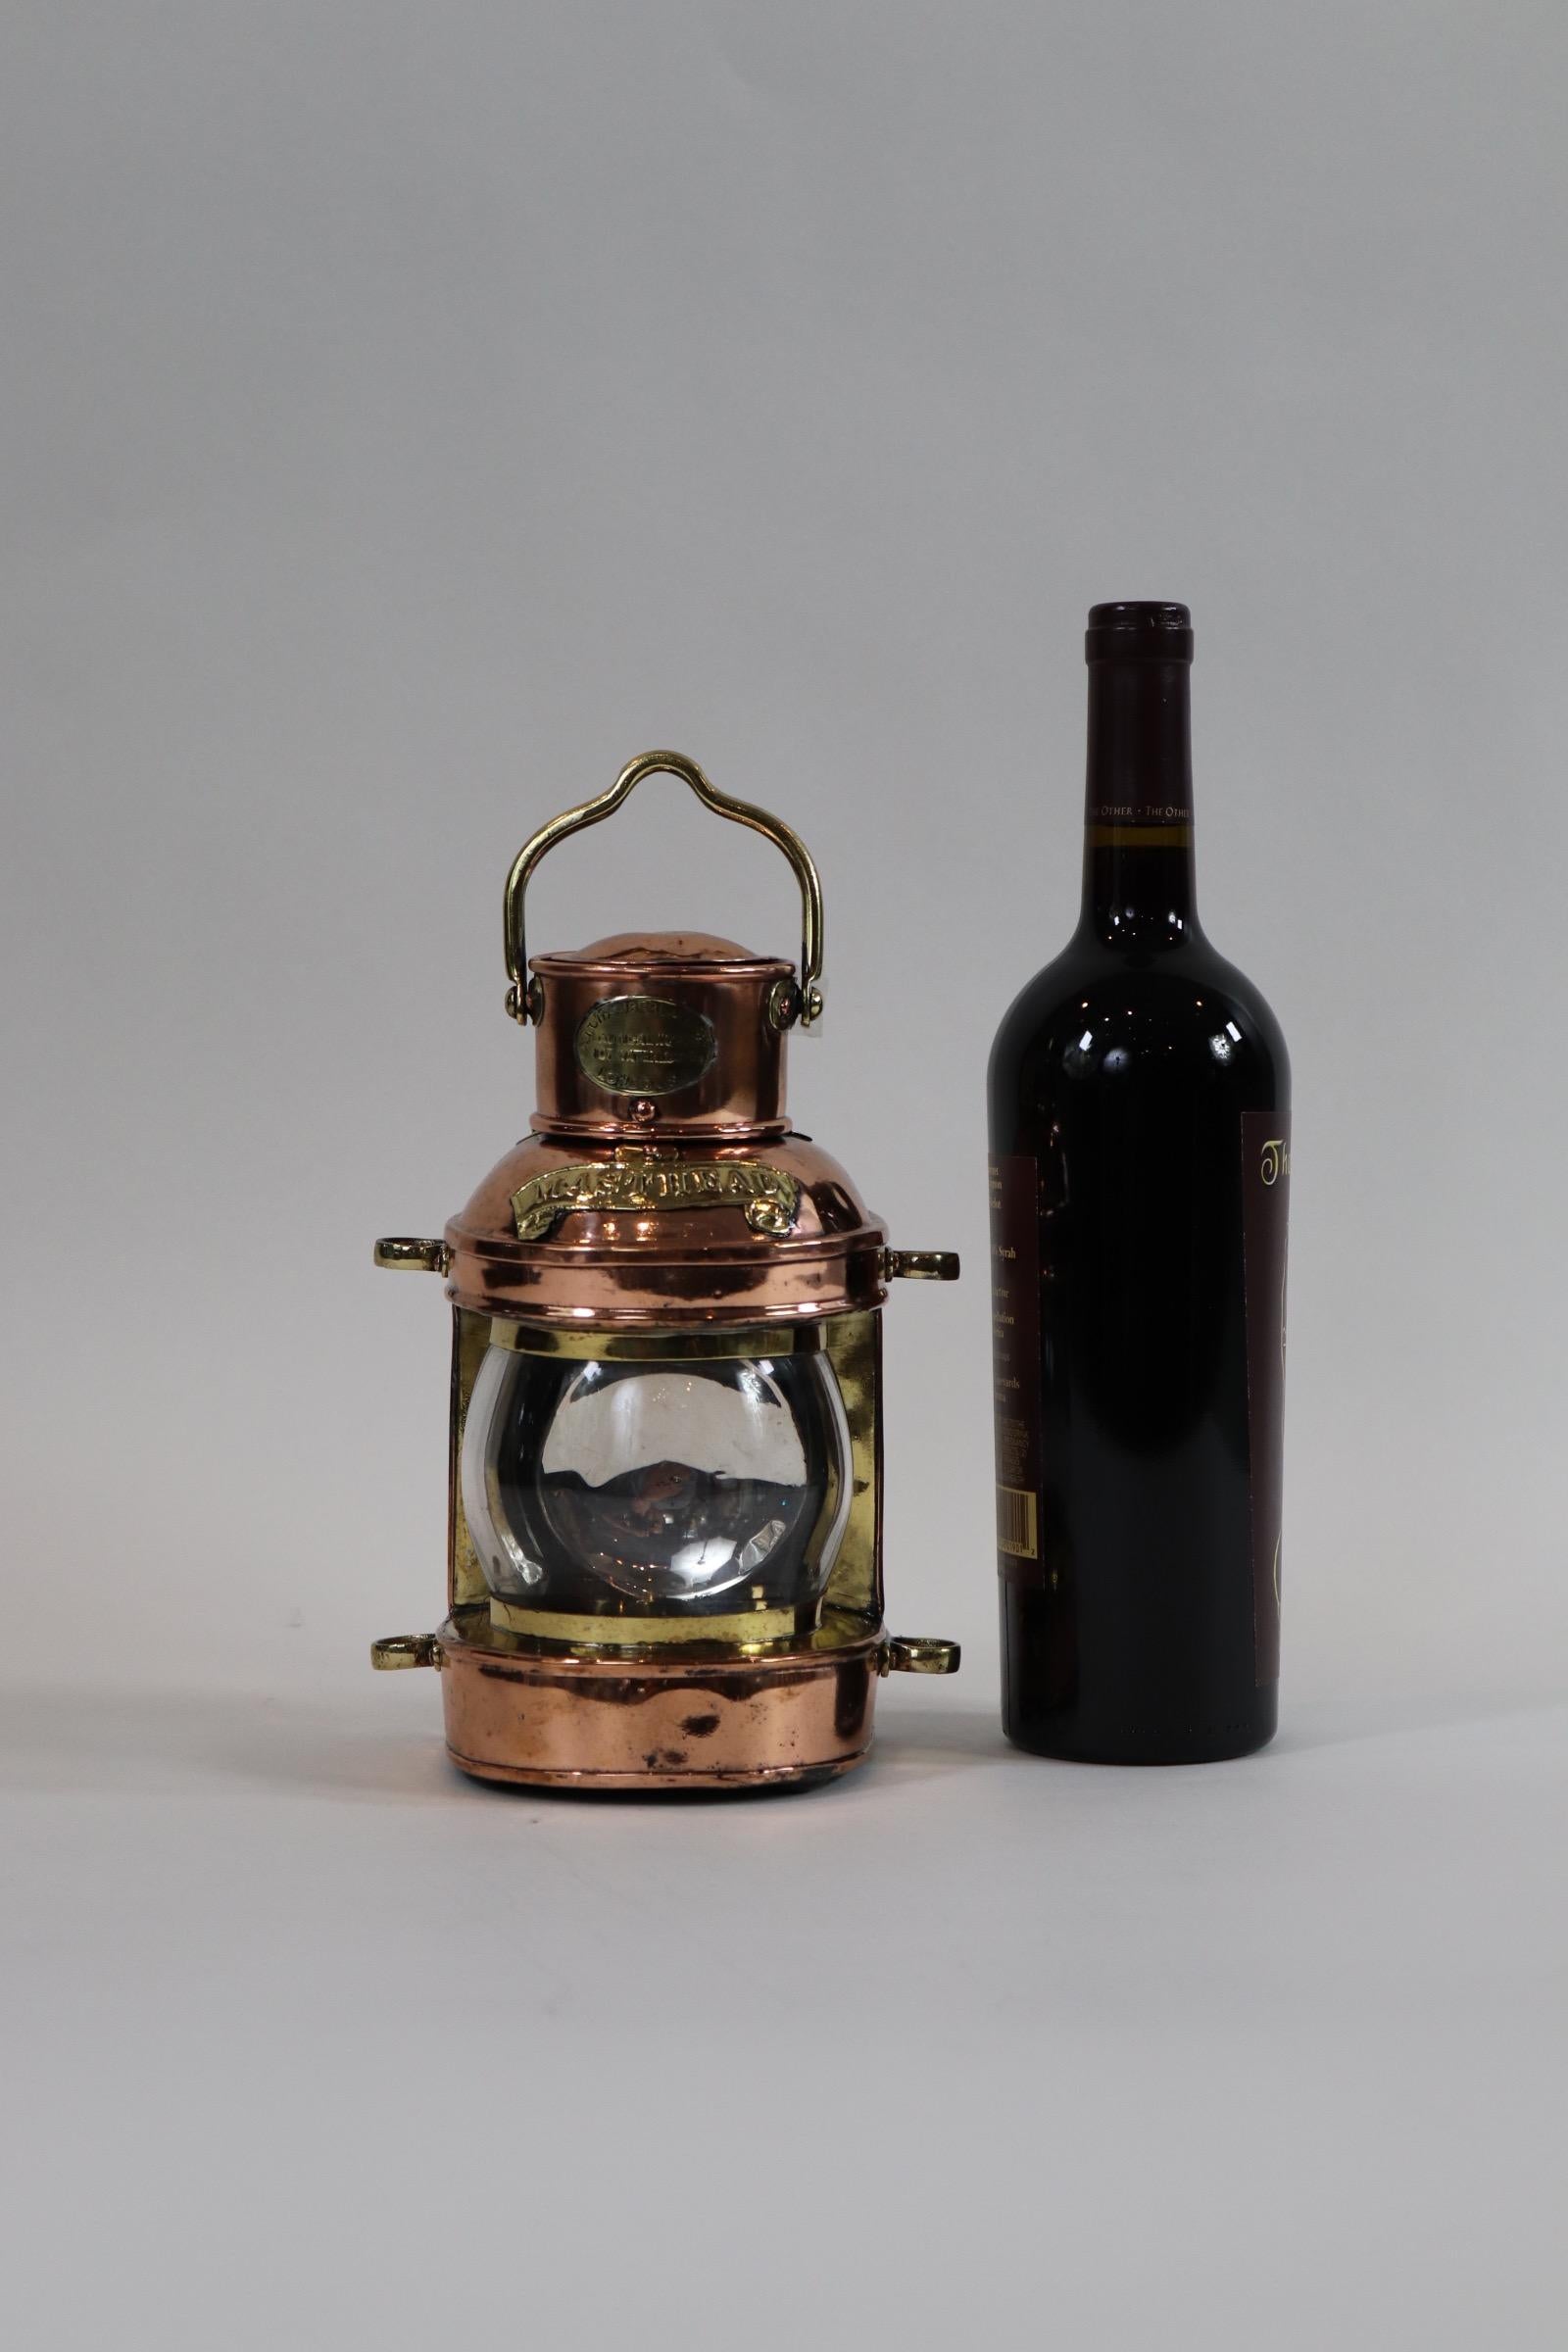 Copper with brass trim ships masthead lantern of English manufacture. Makers badge of Chamberlain of Waterloo, London. With glass lens. Tank with reflector. Polished and lacquered. Weight is 2 pounds.